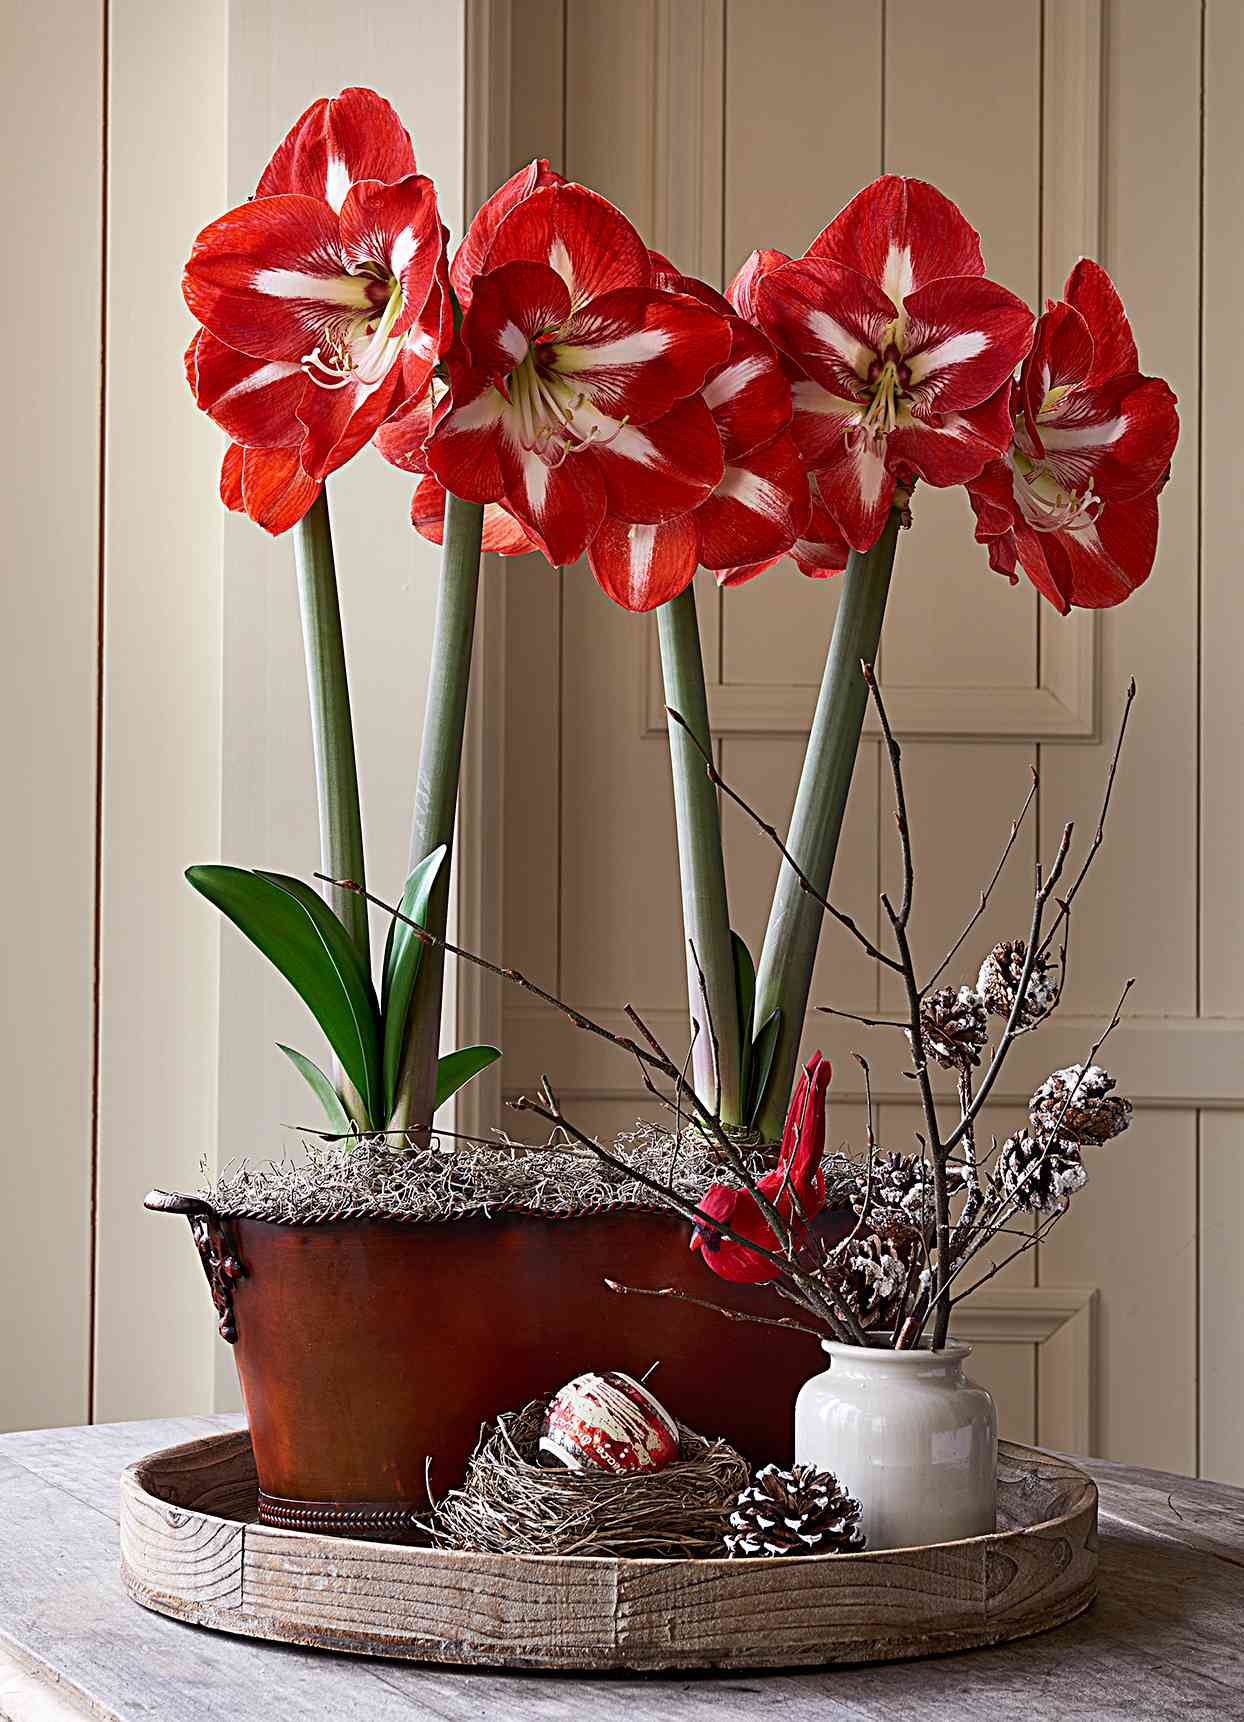 Stargazer Amaryllis in decorative pot sitting on table in room